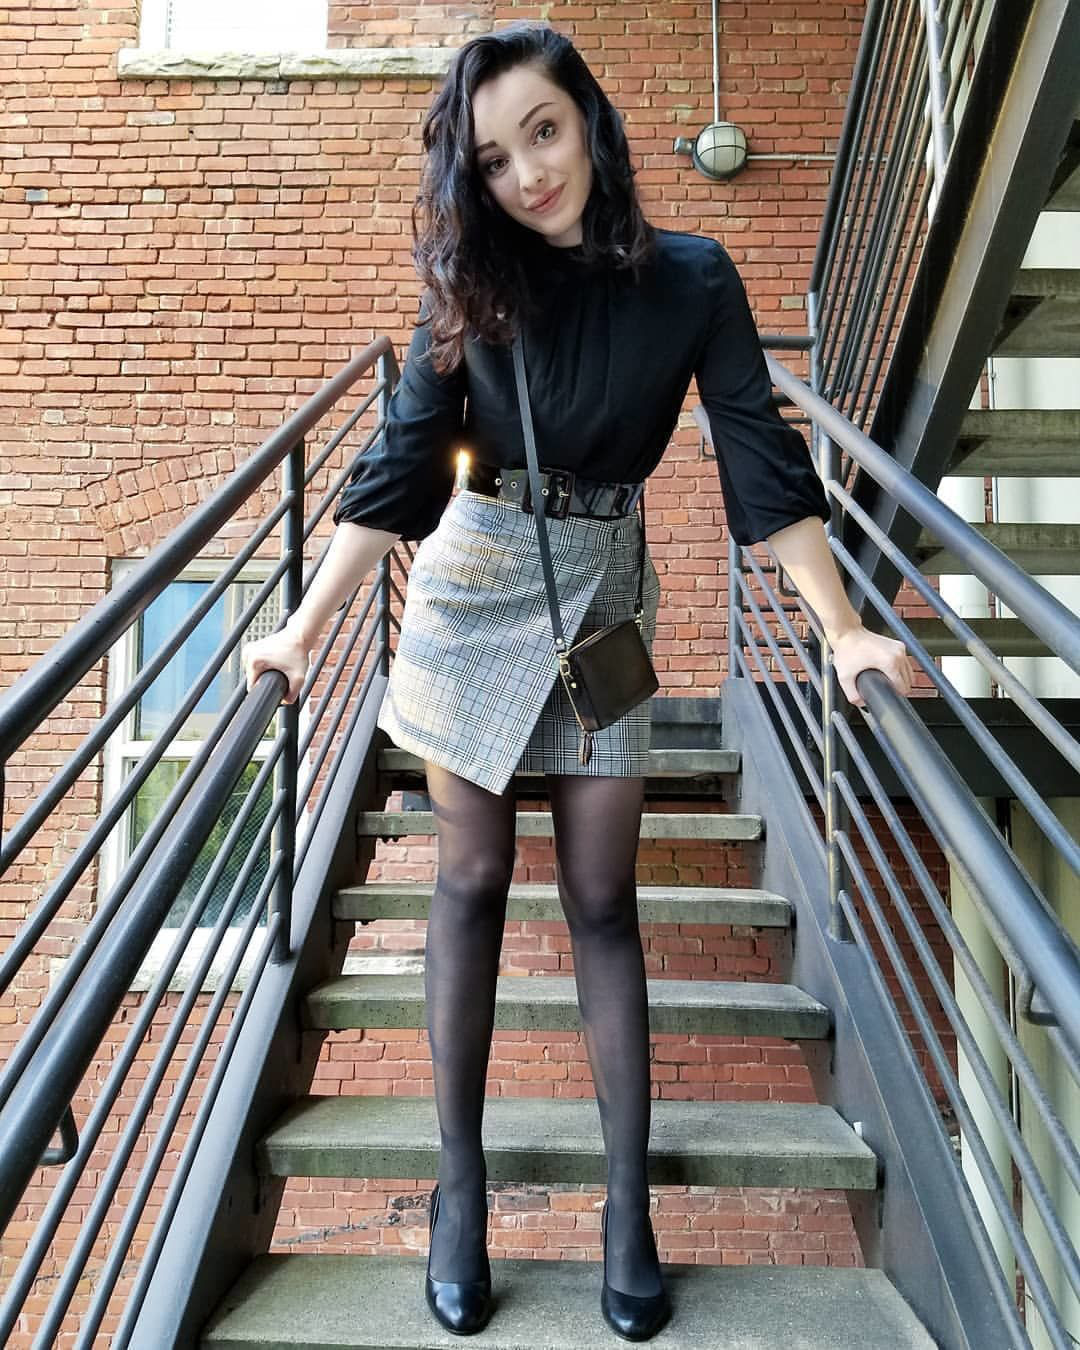 Celebrity Legs and Feet in Tights: Emma Dumont`s Legs and Feet in Tights 5